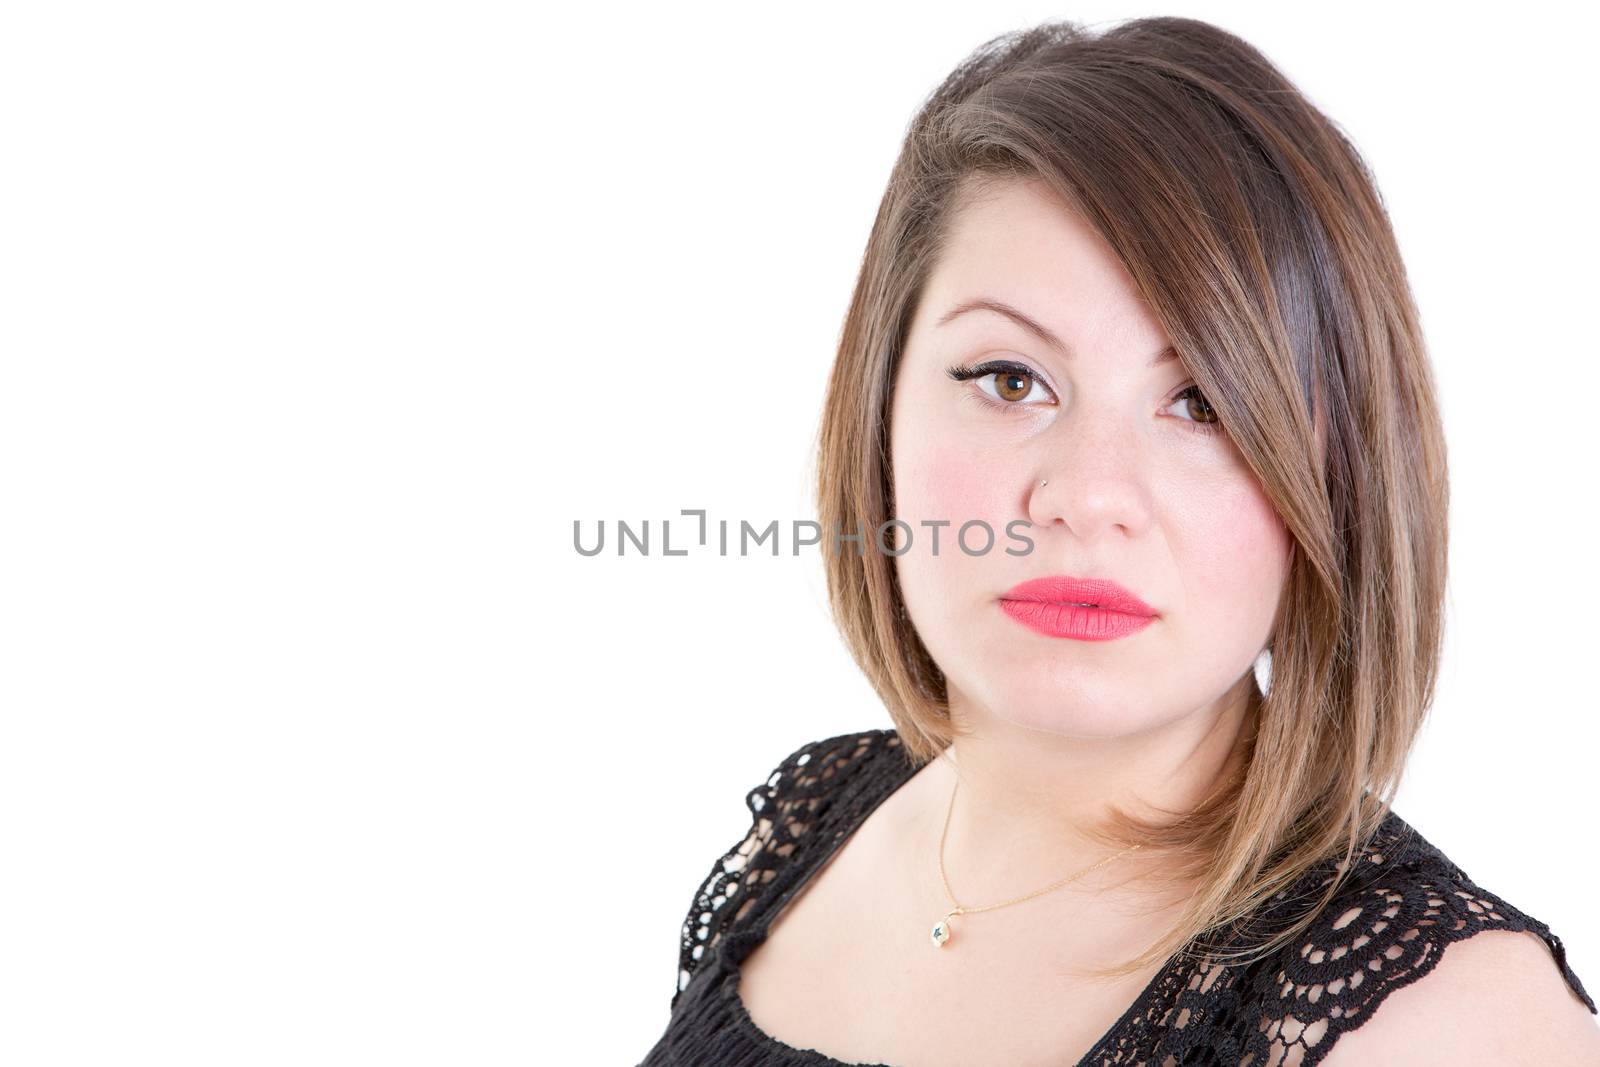 Close up Attractive Young Woman Staring at the Camera Against White Background with Copy Space.